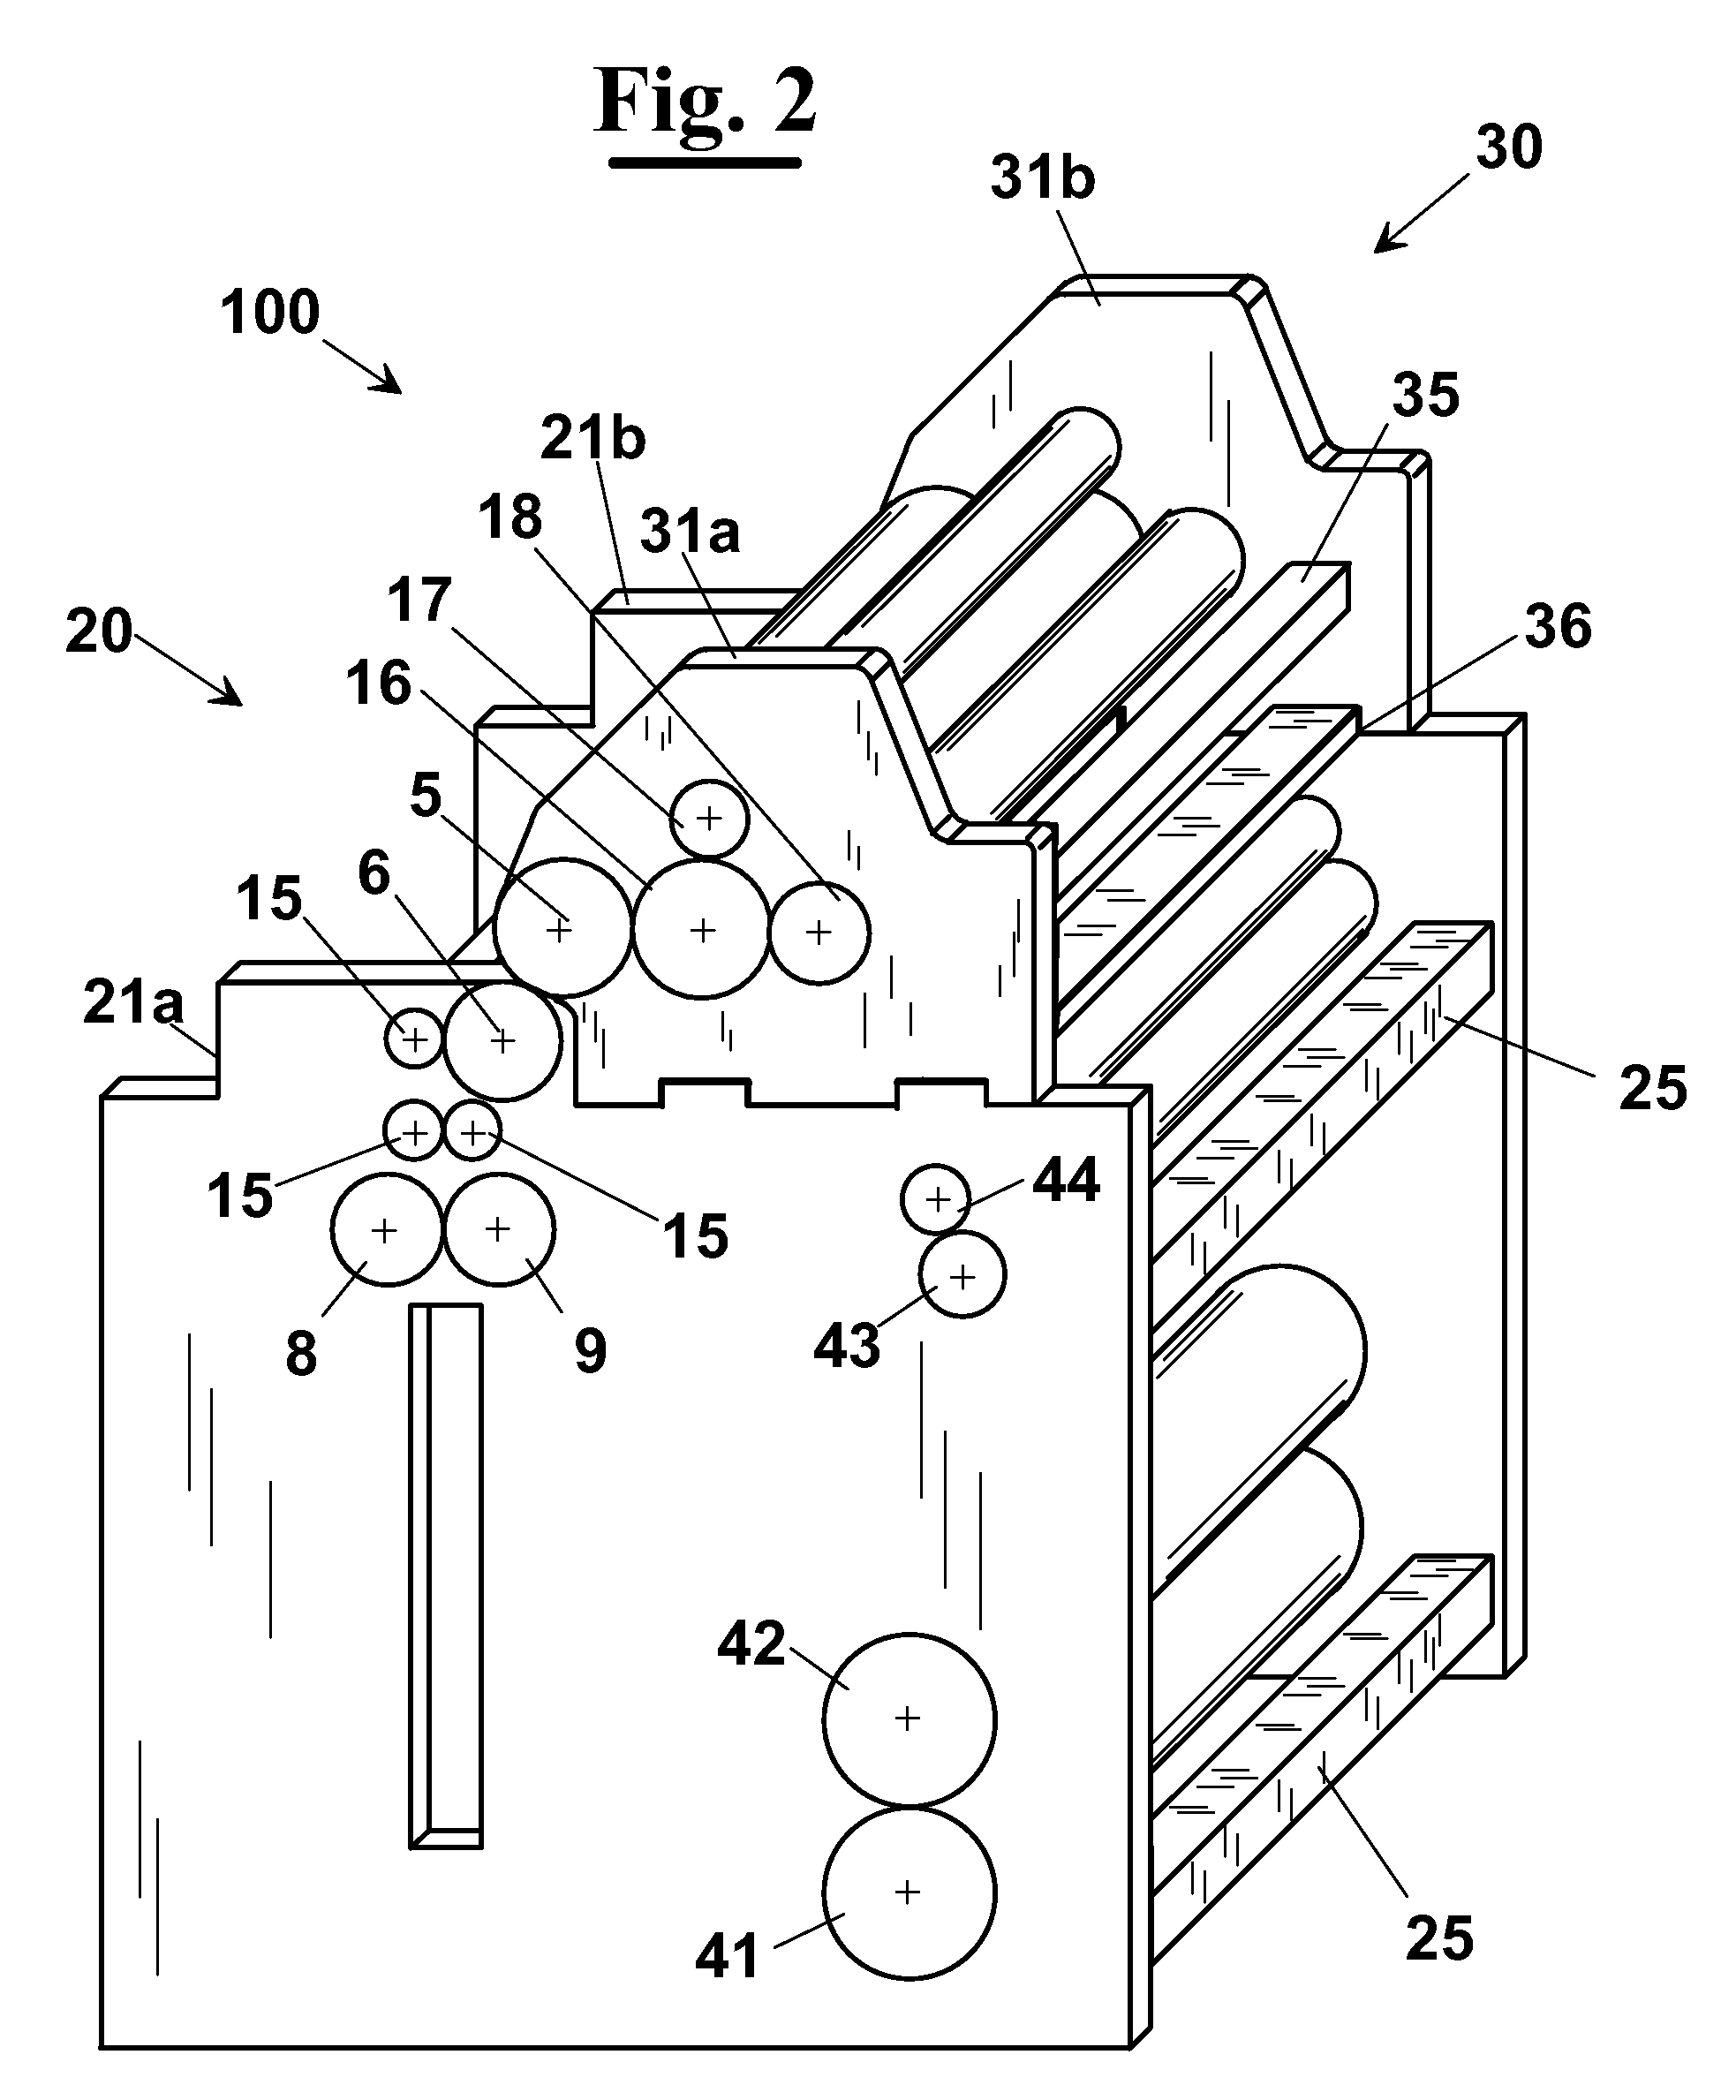 Structure of interfolding machine with adjustable cut-off